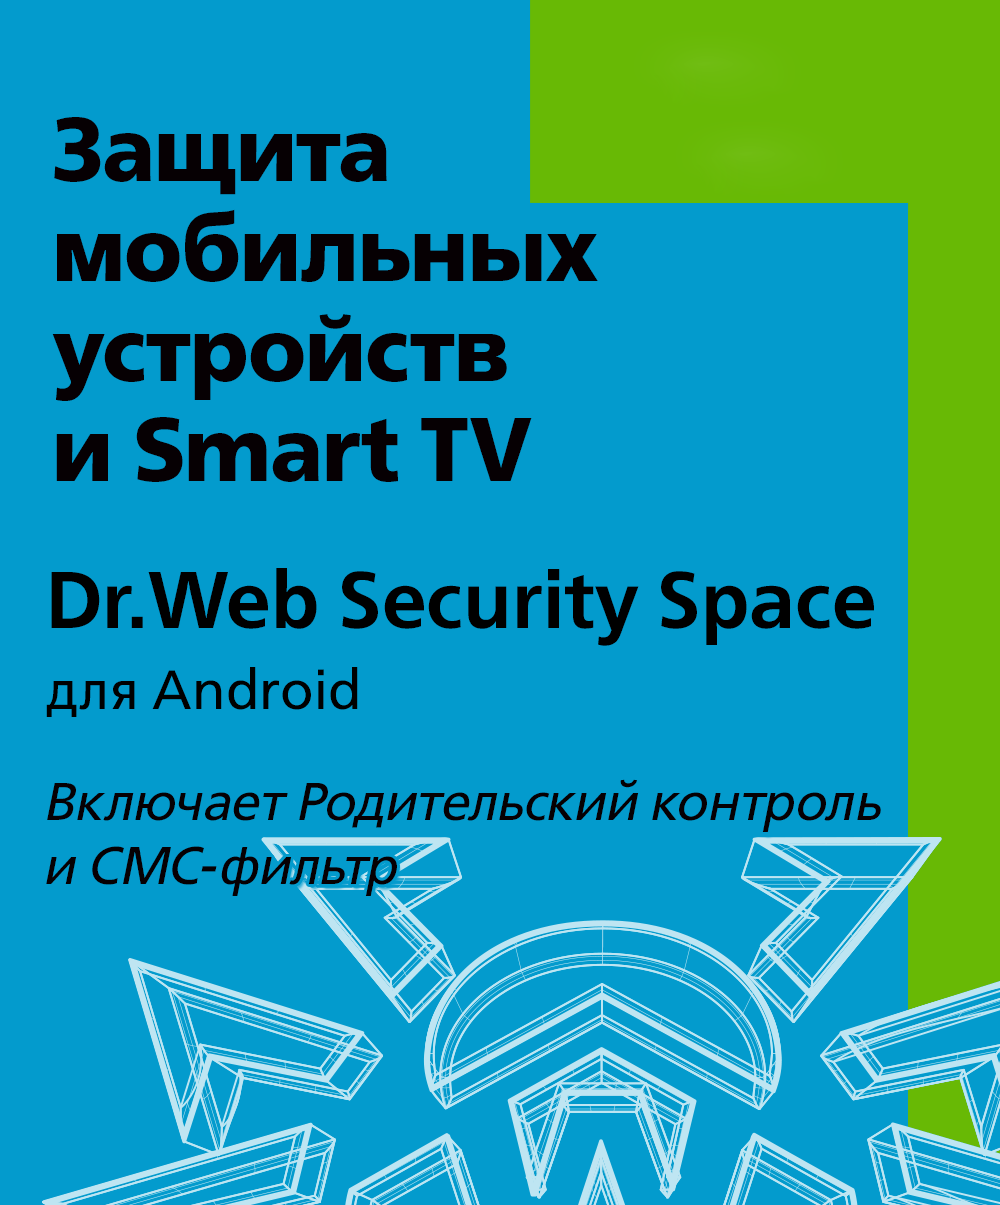 Dr.Web Mobile Security - for 1 device, for 6 months